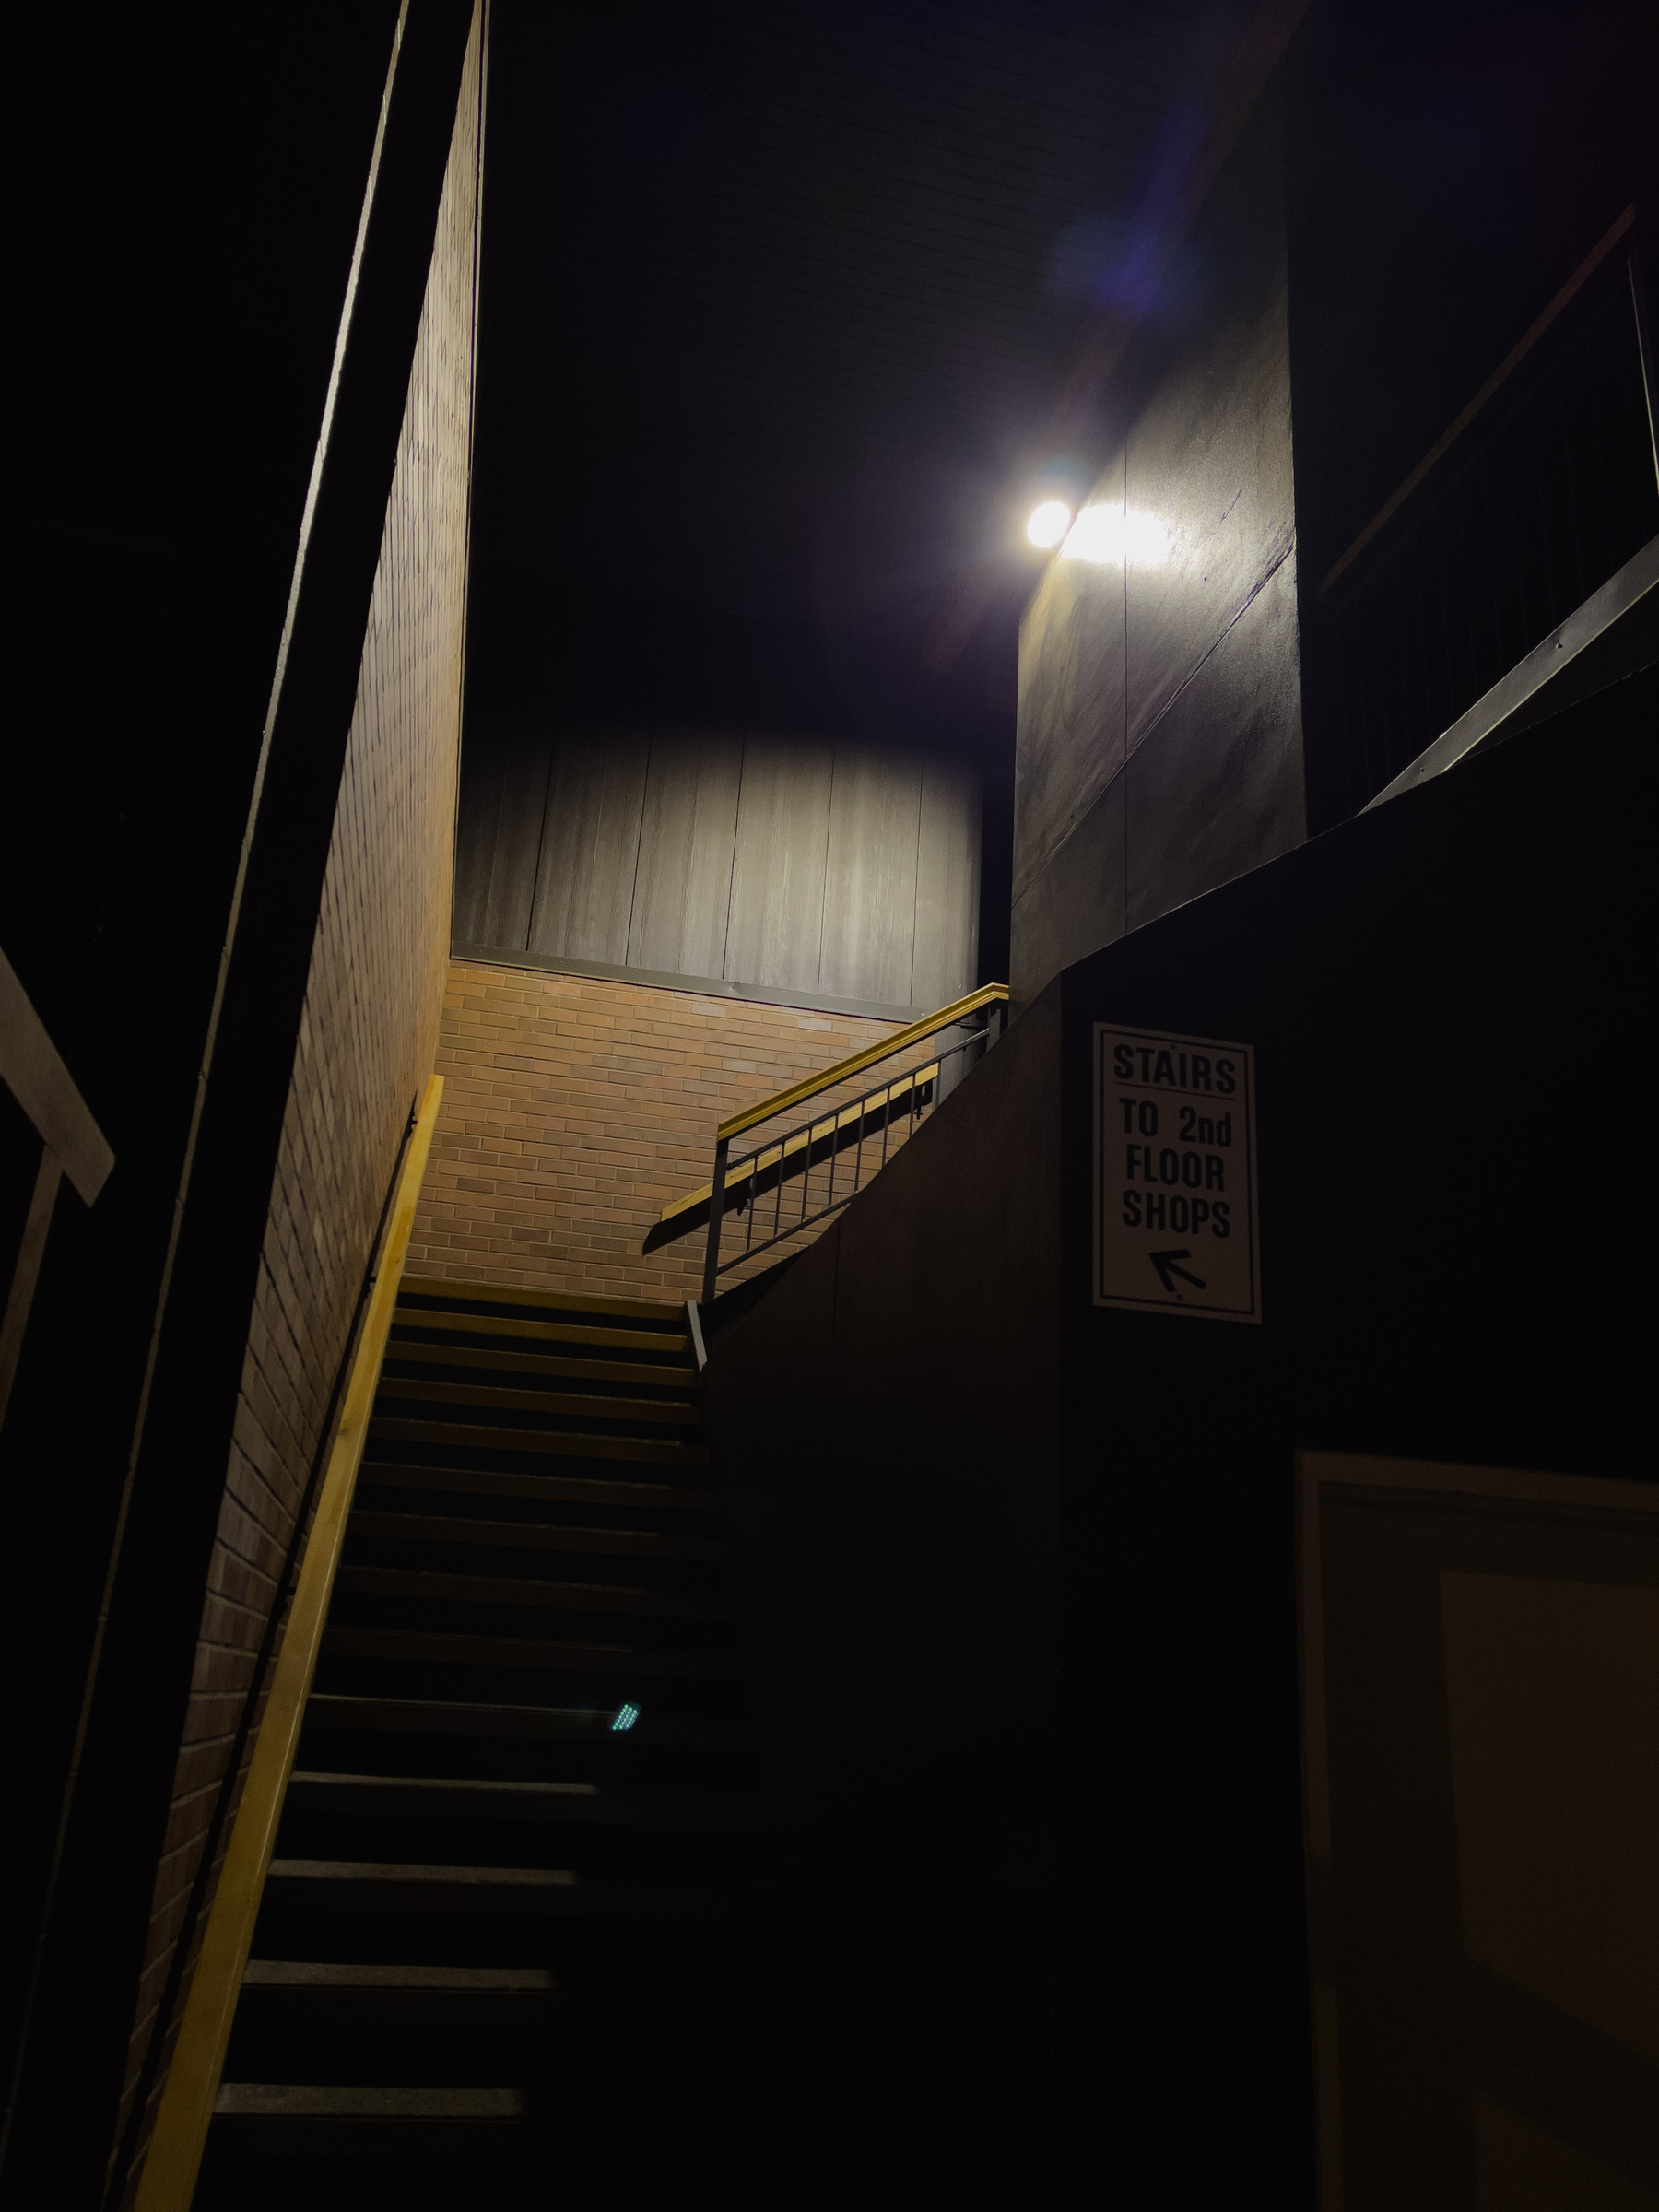 Exterior stairway to second floor of a commercial building at night lit by a security light.